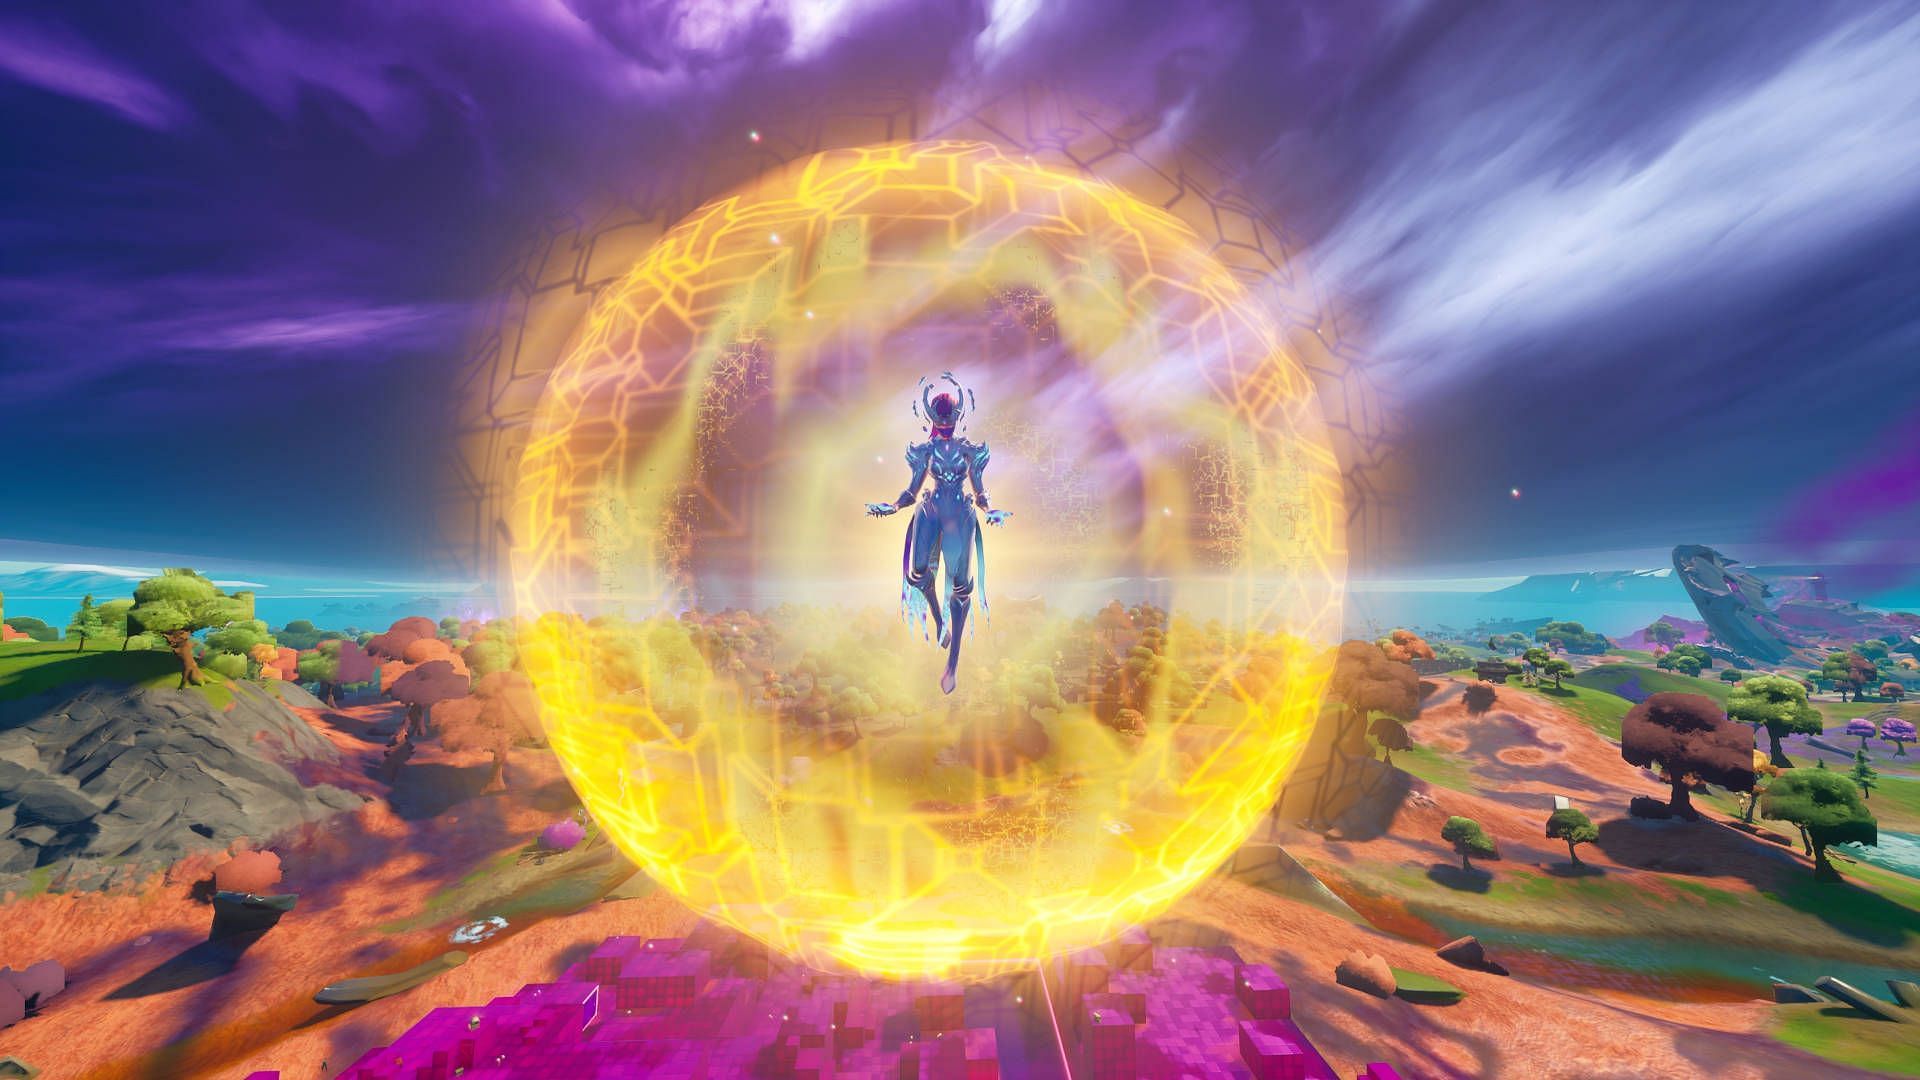 Fortnite villains who will shine once more (Image via Epic Games)